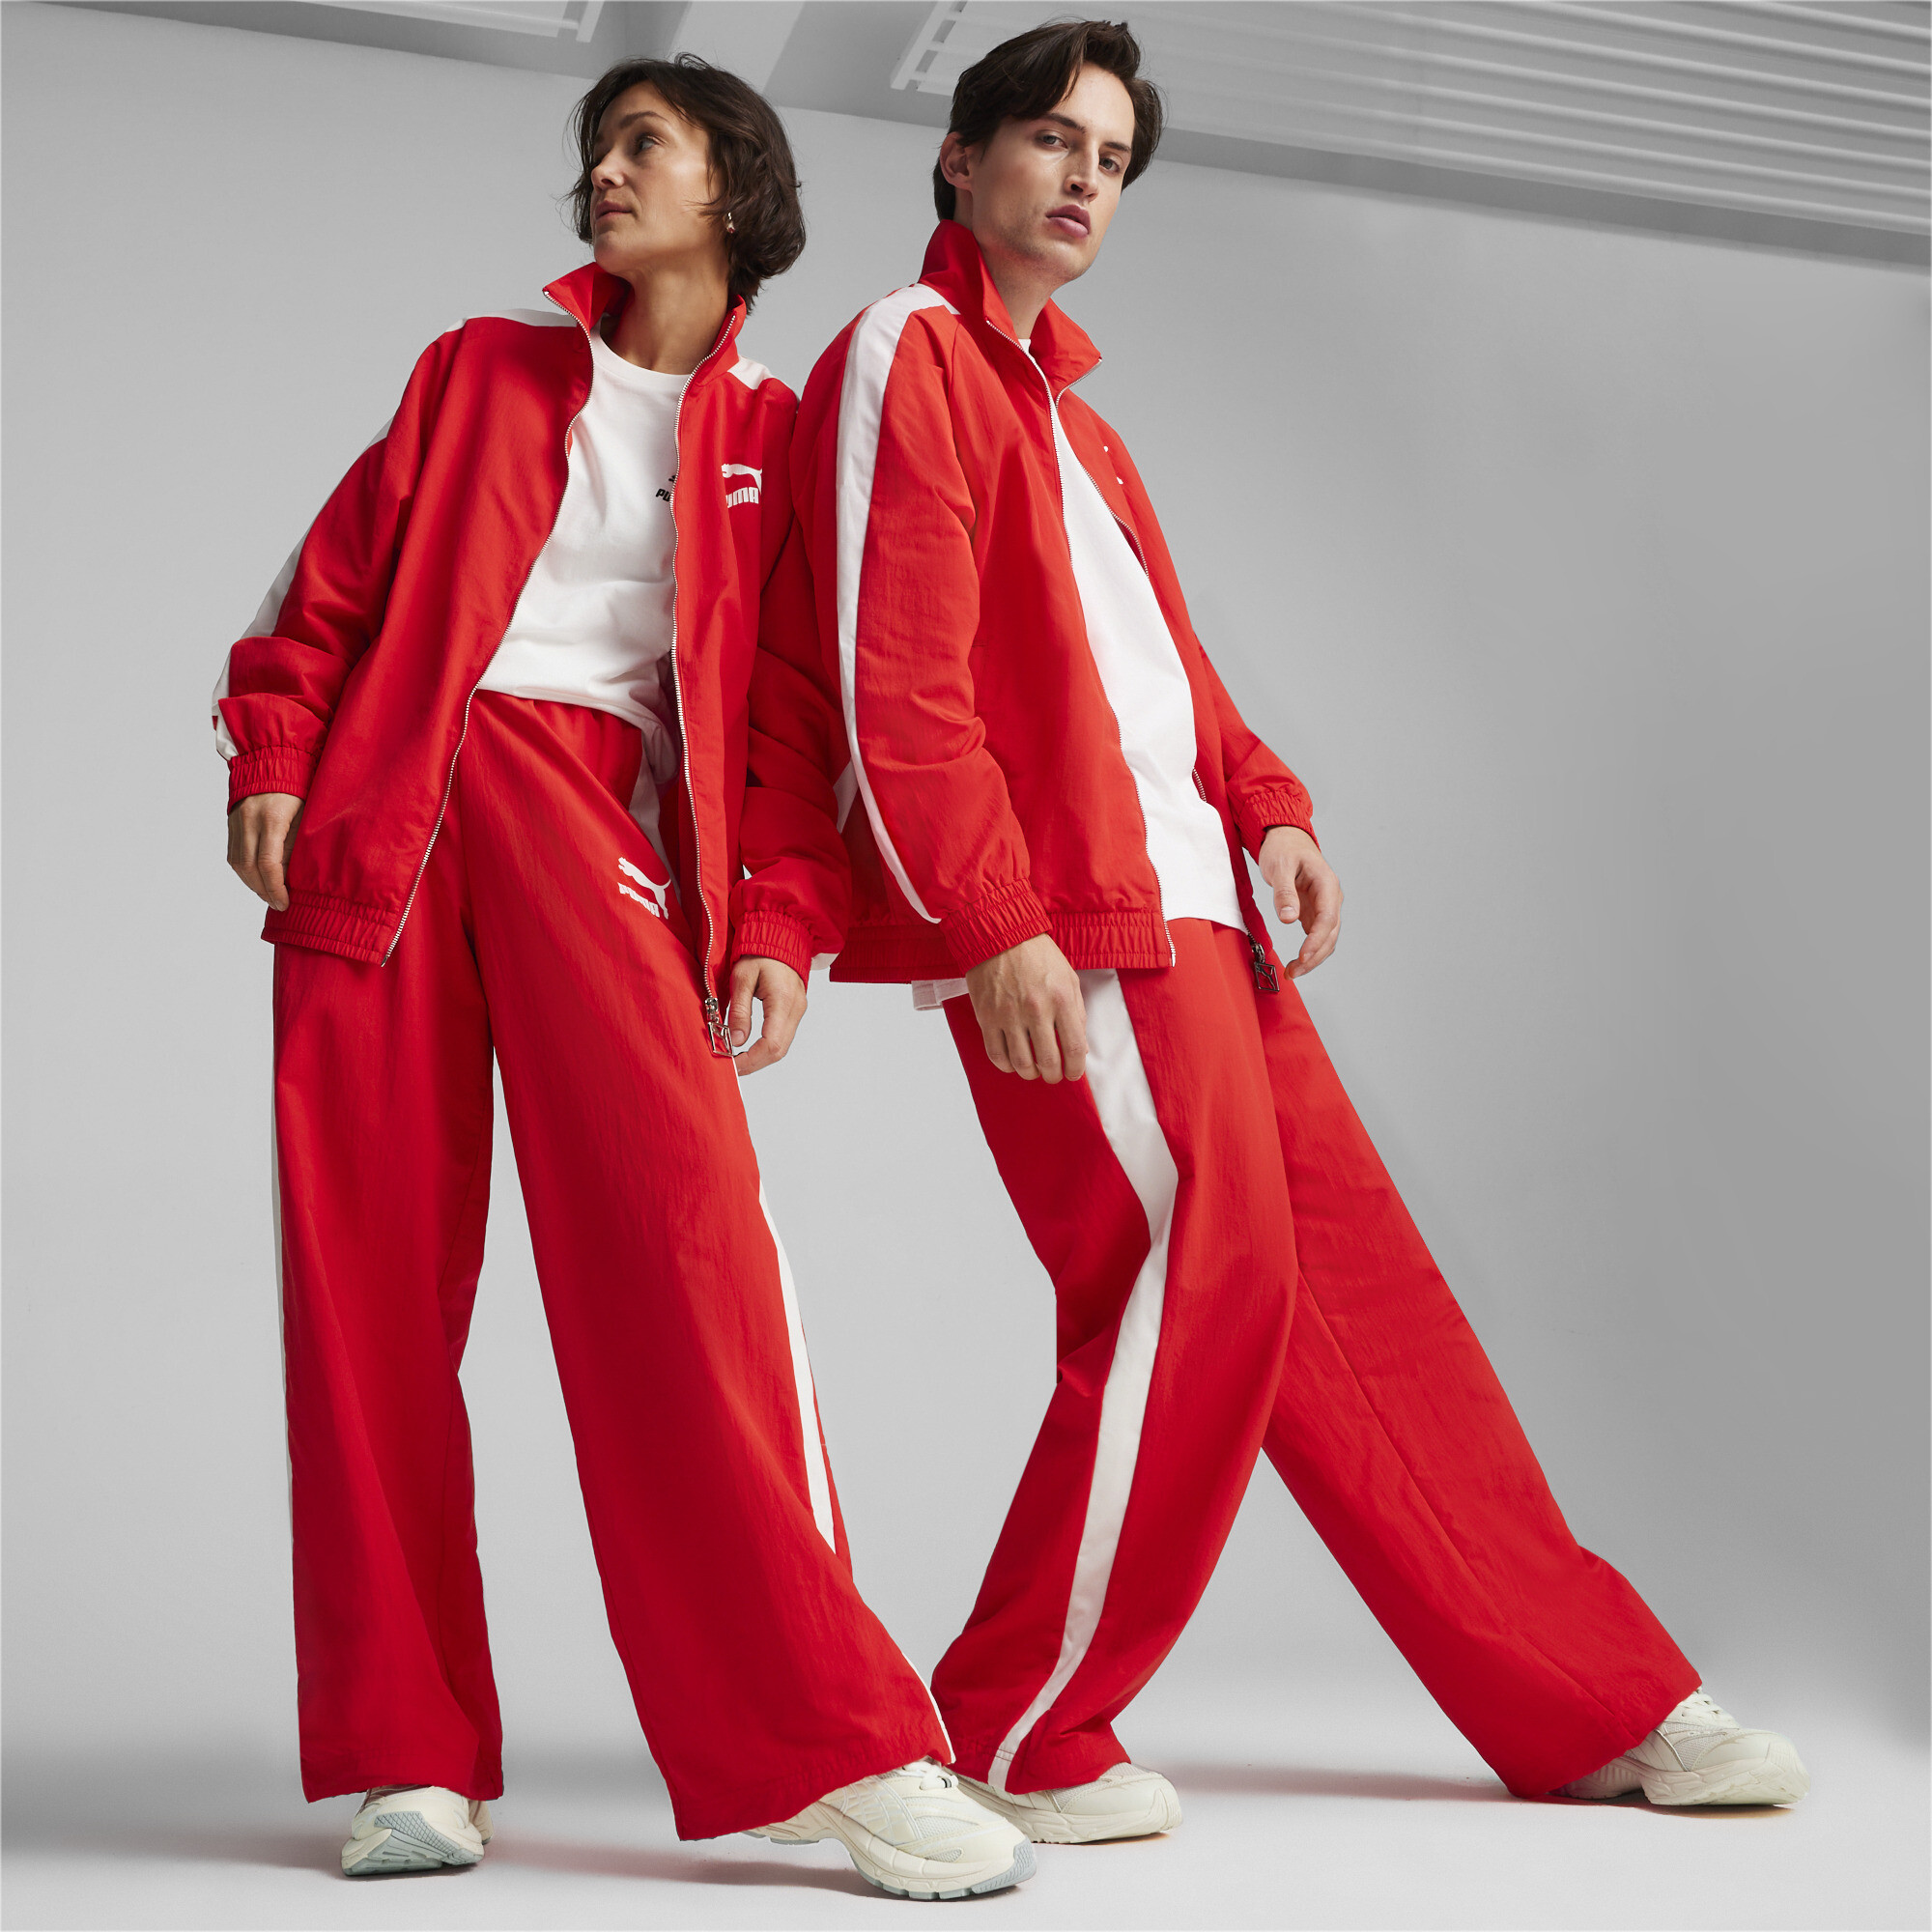 Puma T7's Oversized Track Pants, Red, Size S, Women